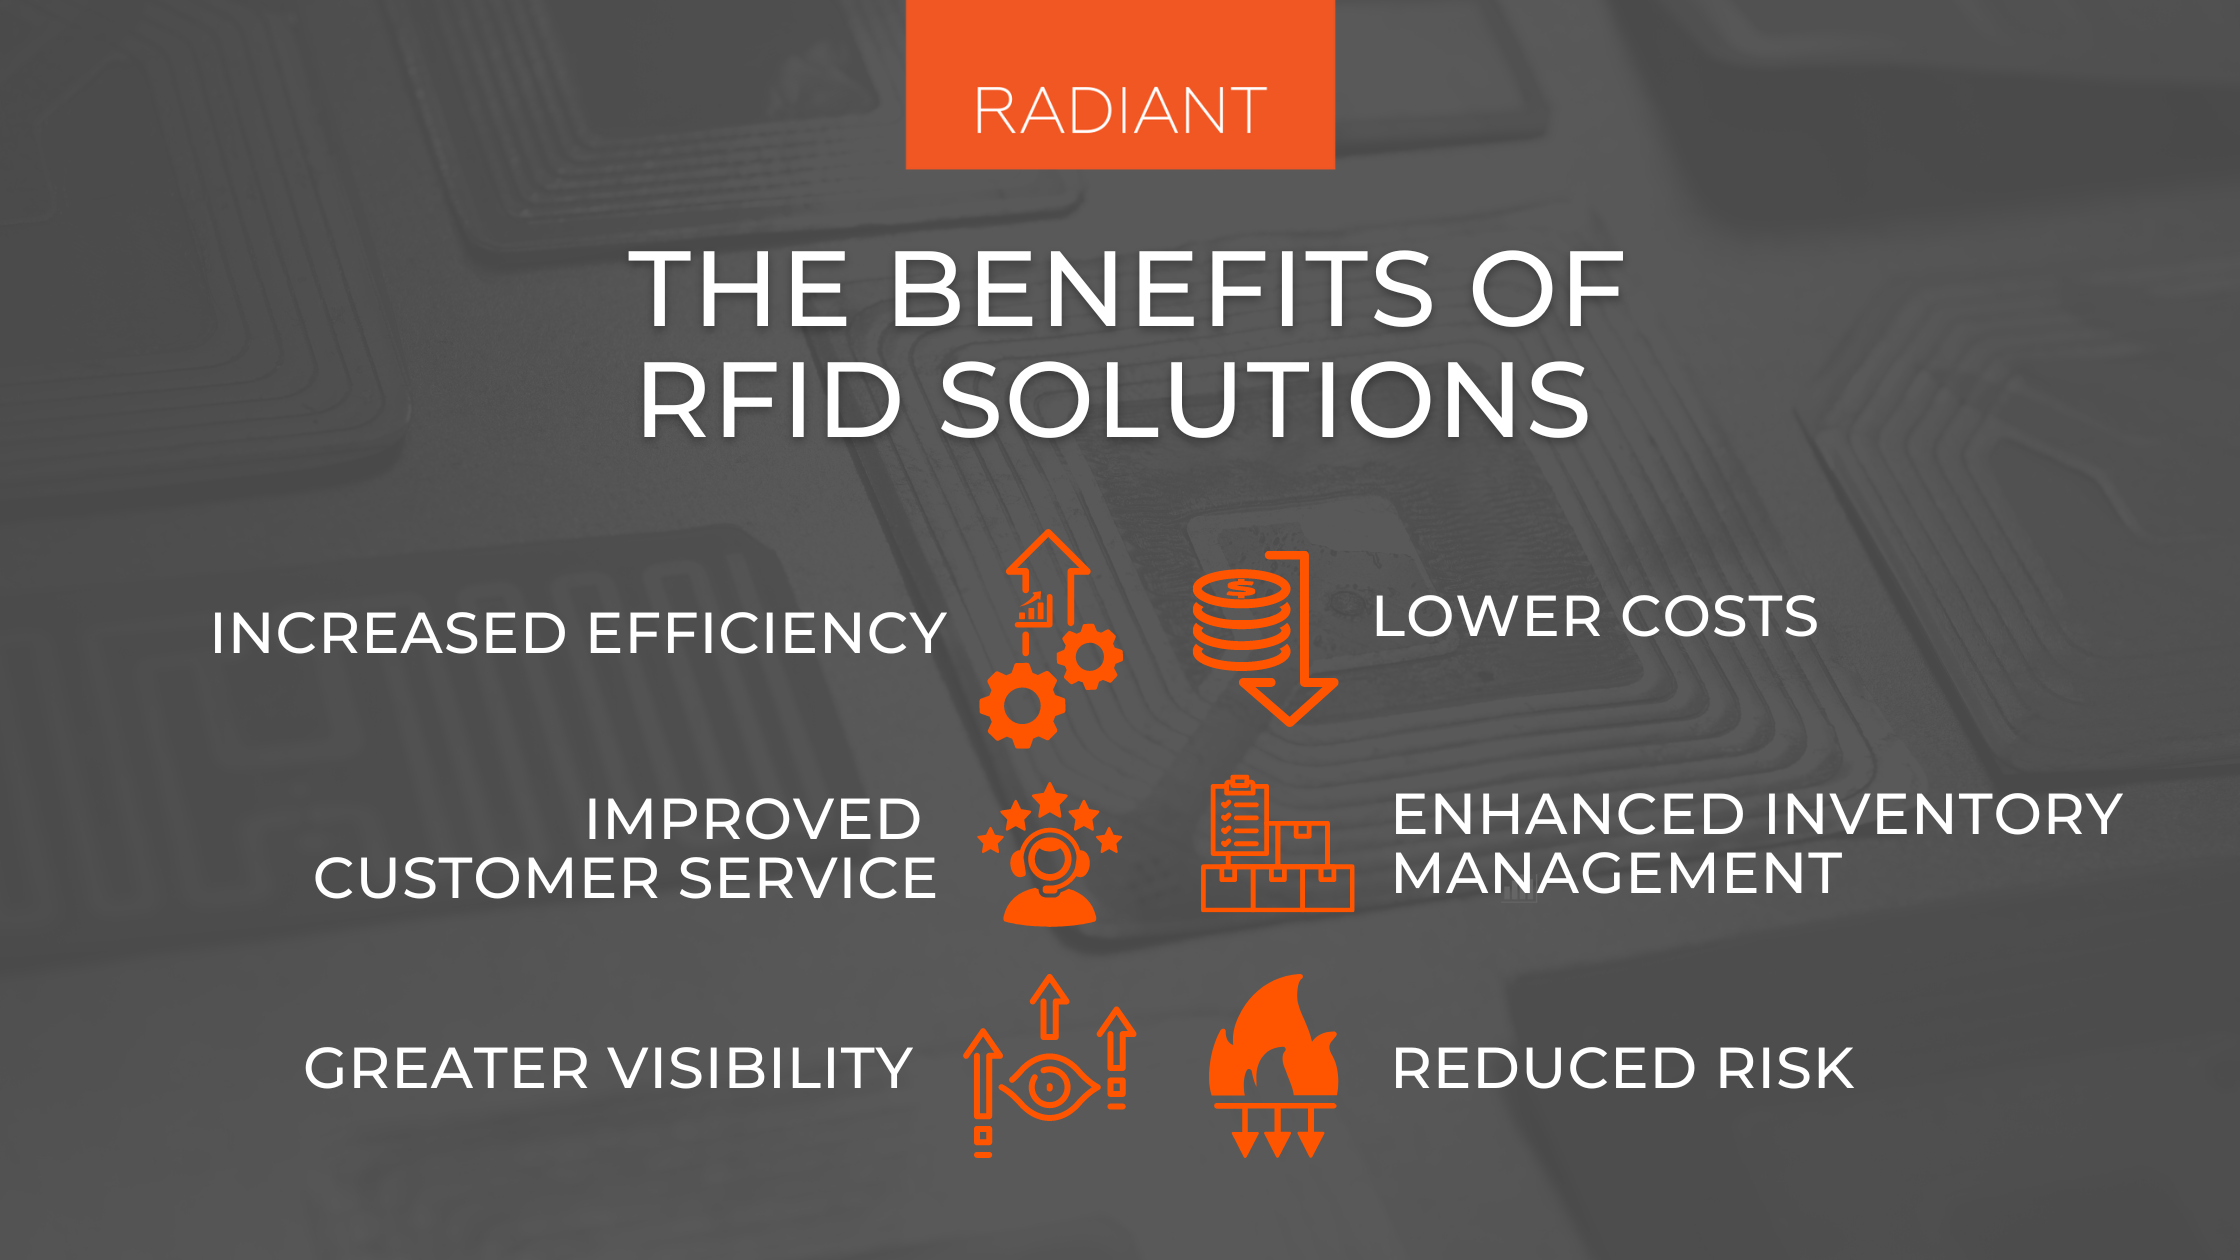 RFID Asset Tracking System - RFID Software Solutions - RFID Tracker - RFID Technology Solutions - RFID Systems - How To Get The Most Out Of An RFID Solution - How To Determine If You Need An RFID Tracking Solution - Physical Assets - RFID Solutions - RFID System - RFID IoT Solutions - RFID Solution - RFID Software Solution